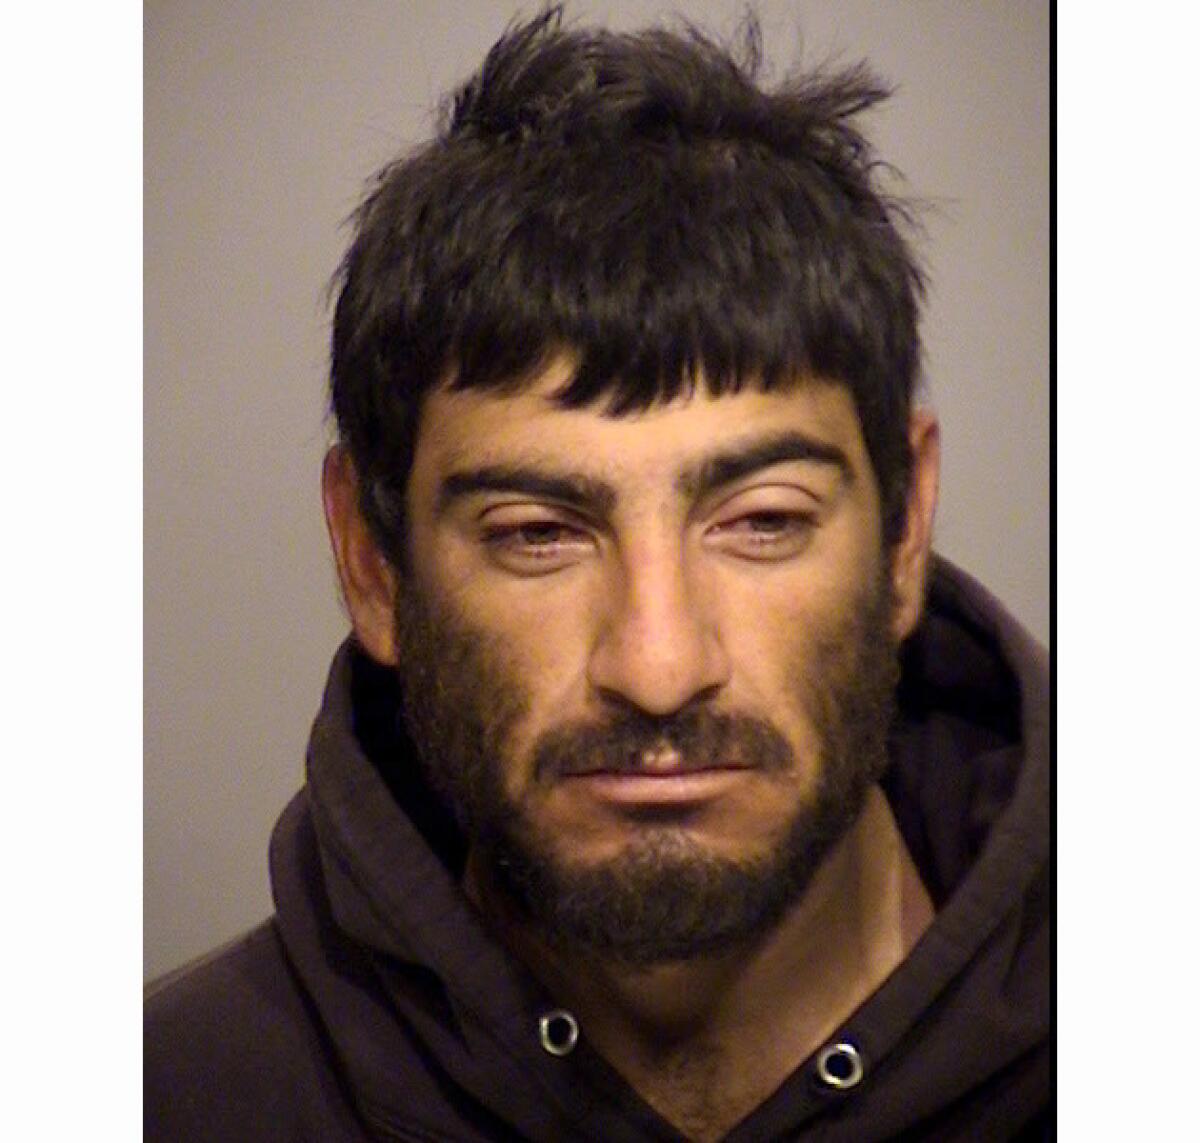 Jonathan Alfaro, shown in a booking photo, "walked off" from a Ventura detention facility, authorities say.